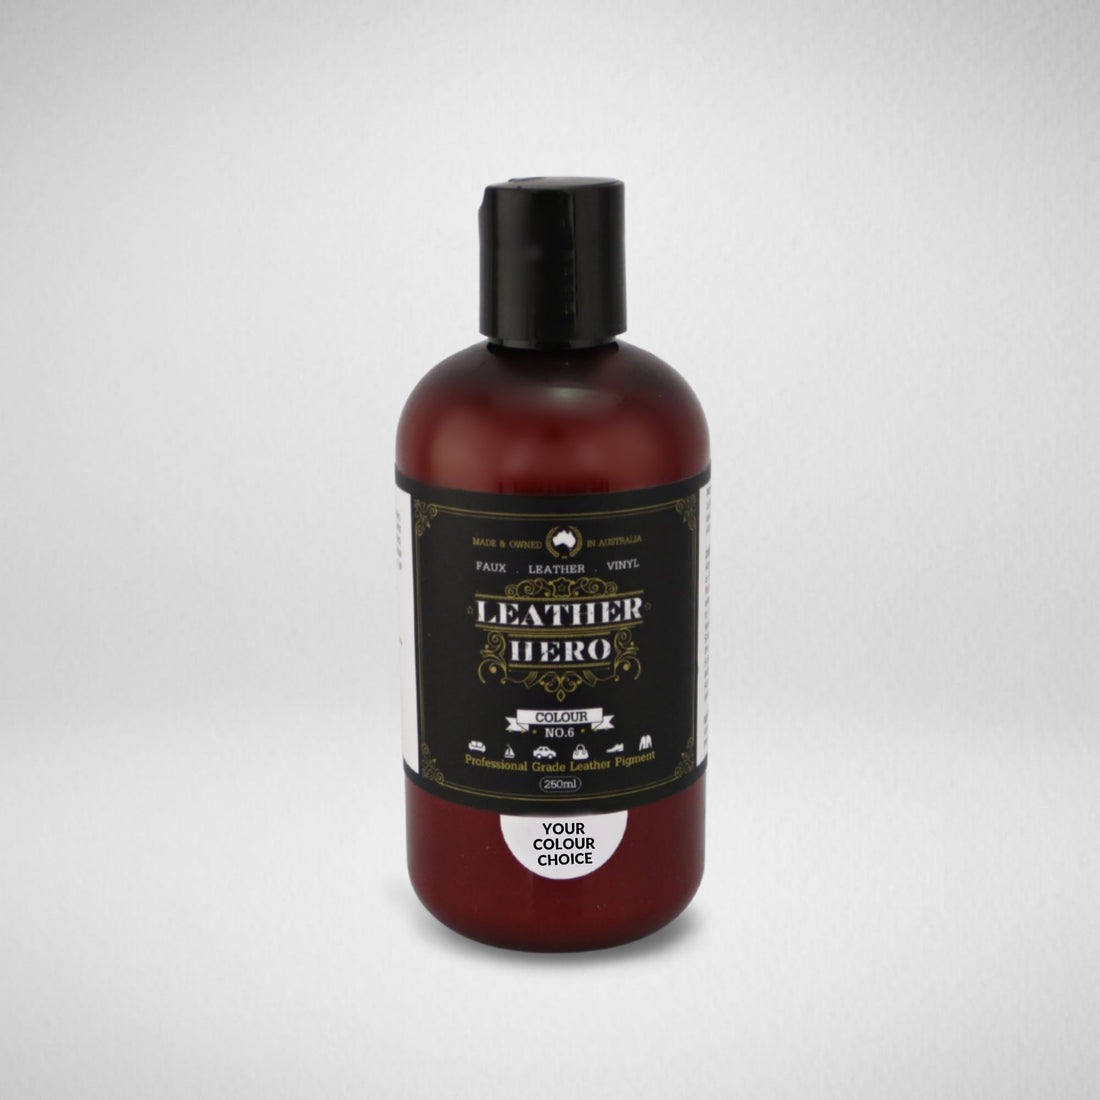 Leather Paint - Banana Leather Repair & Recolouring Leather Hero Australia